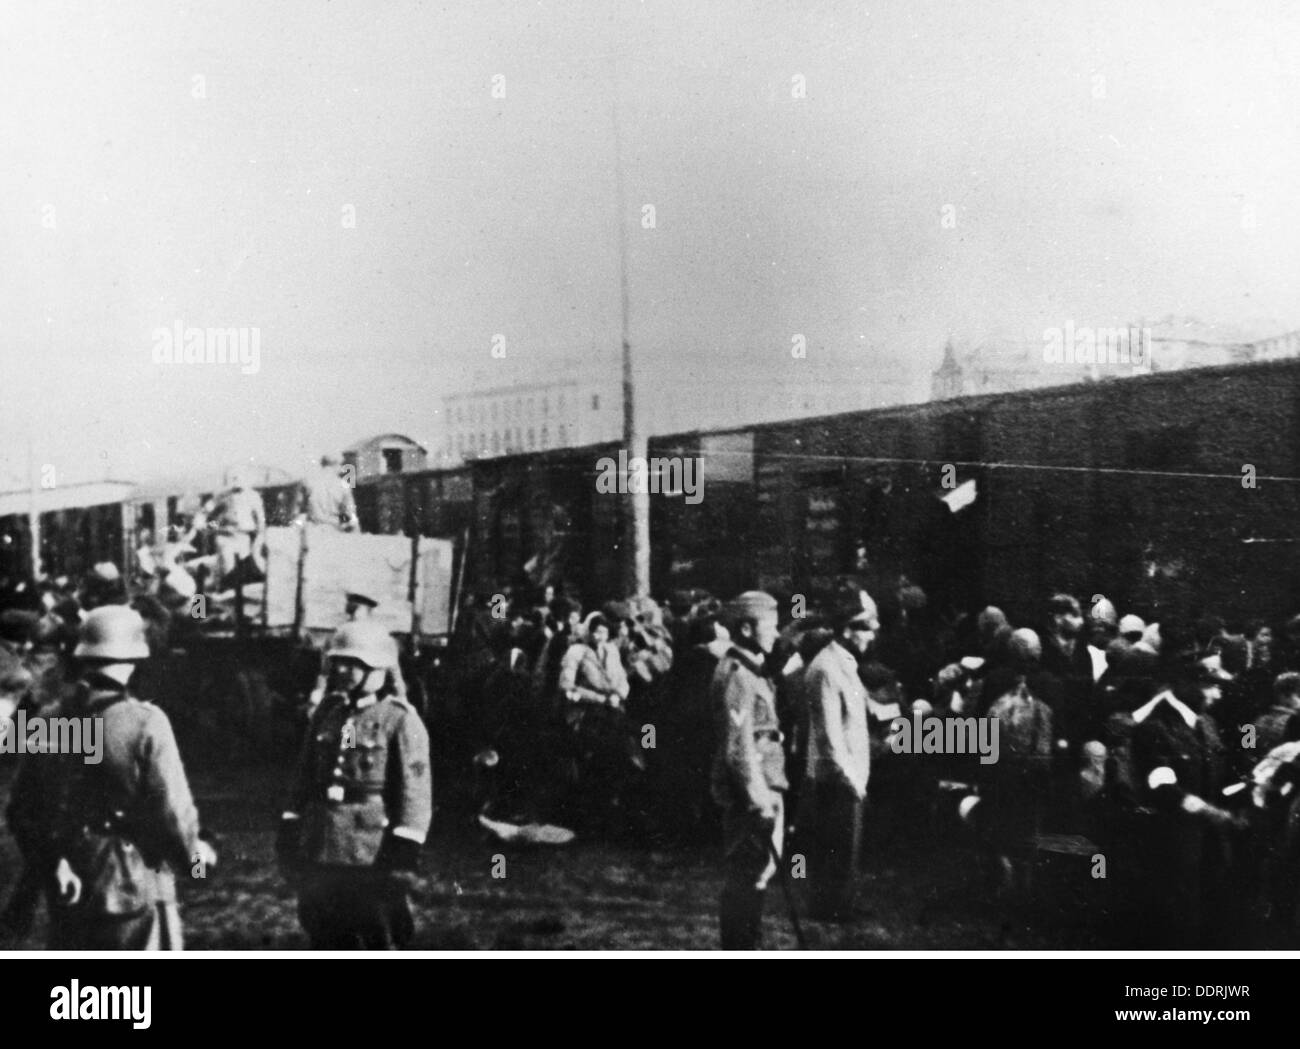 Nazism / National Socialism,serious crime,persecution of the Jews,Warsaw Ghetto,evacuation 1942 - 1943,Polish Jews are sent into freight cars by SS and Ordnungspolizei,Gdansk Railway Station,Warsaw,photograph the Jewish underground movement,August 1942,deportation,deportations,reloading point,trans-shipment centre,reloading points,trans-shipment centres,wagon,transport,transportation,liquidation,the Final Solution the Jewish question,action Reinhardt,holocaust,Nazi,Nazis,railway,railroad,railways,railroads,Reichsbahn,order police,,Additional-Rights-Clearences-Not Available Stock Photo